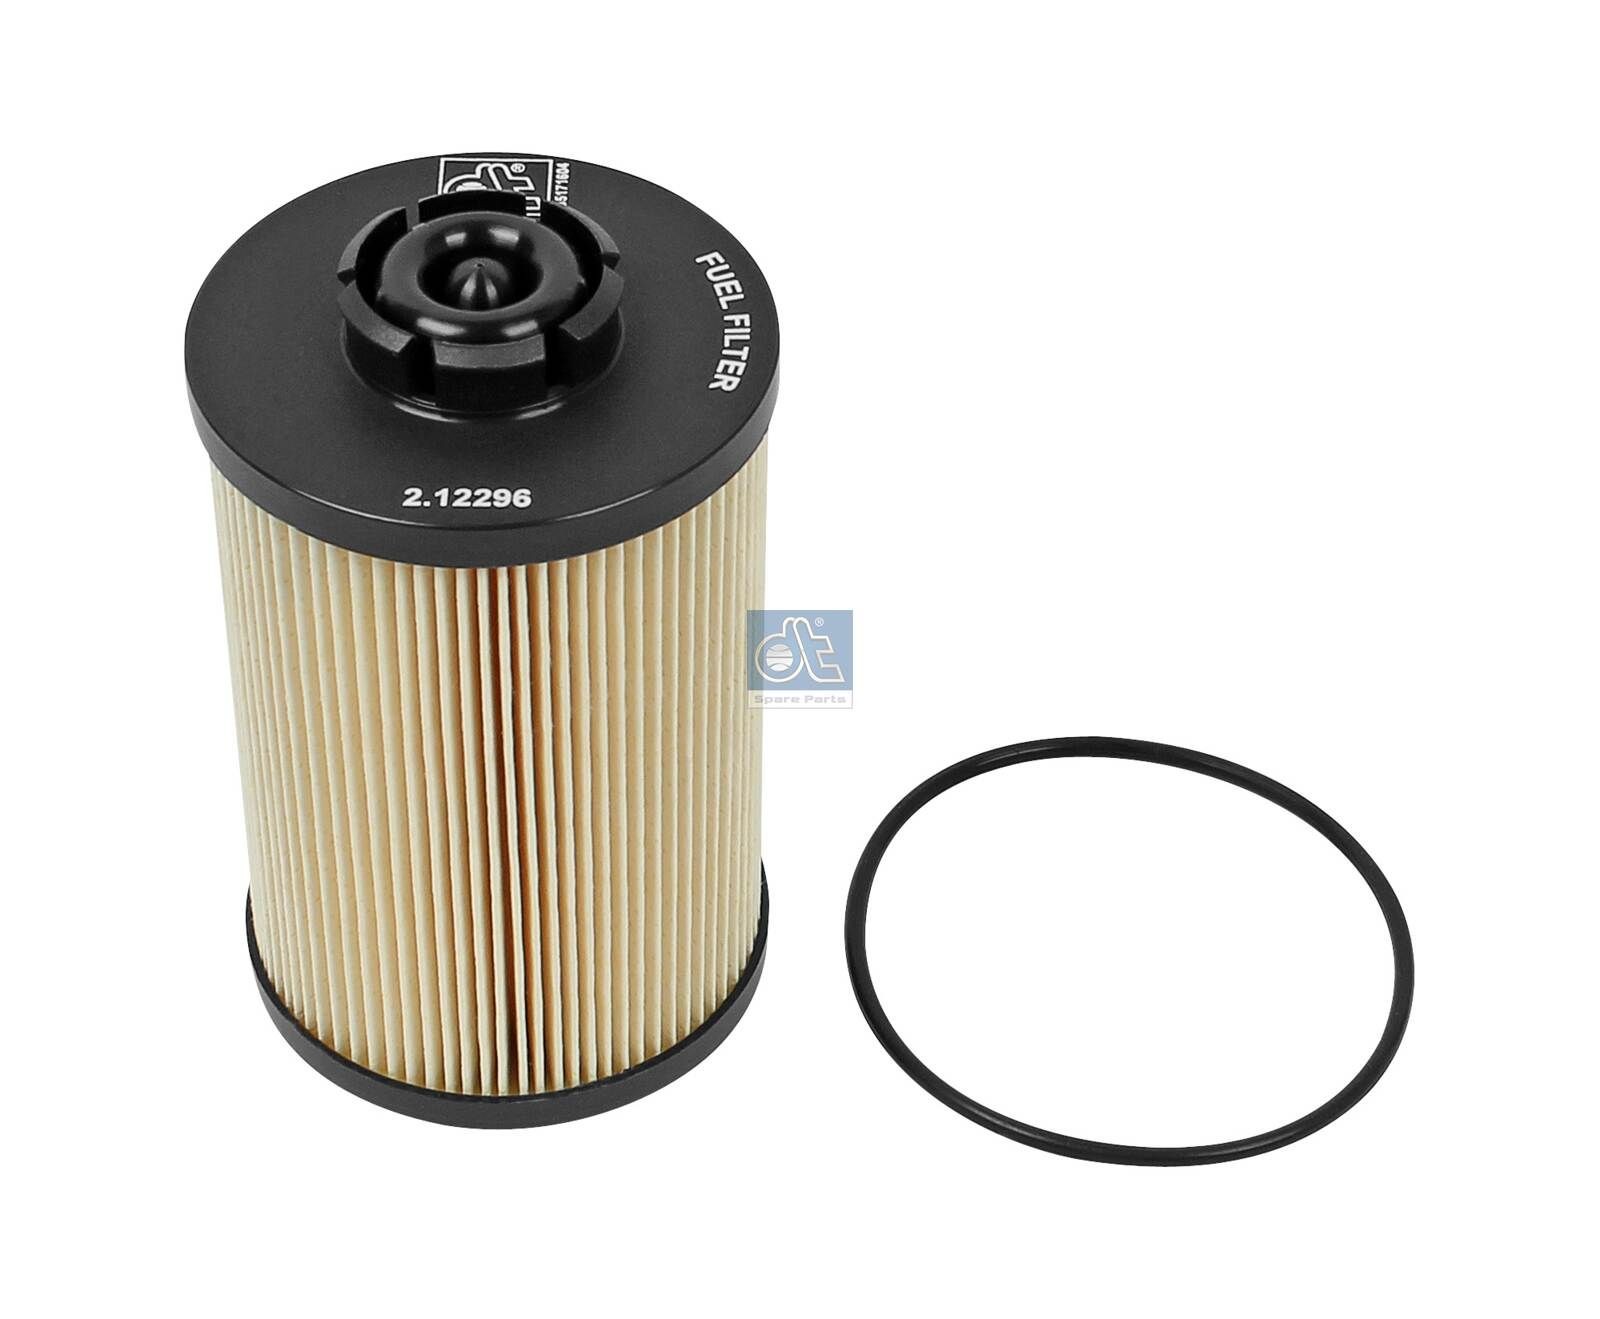 PU 1058X DT Spare Parts 2.12296 Fuel filter 7420 998 806